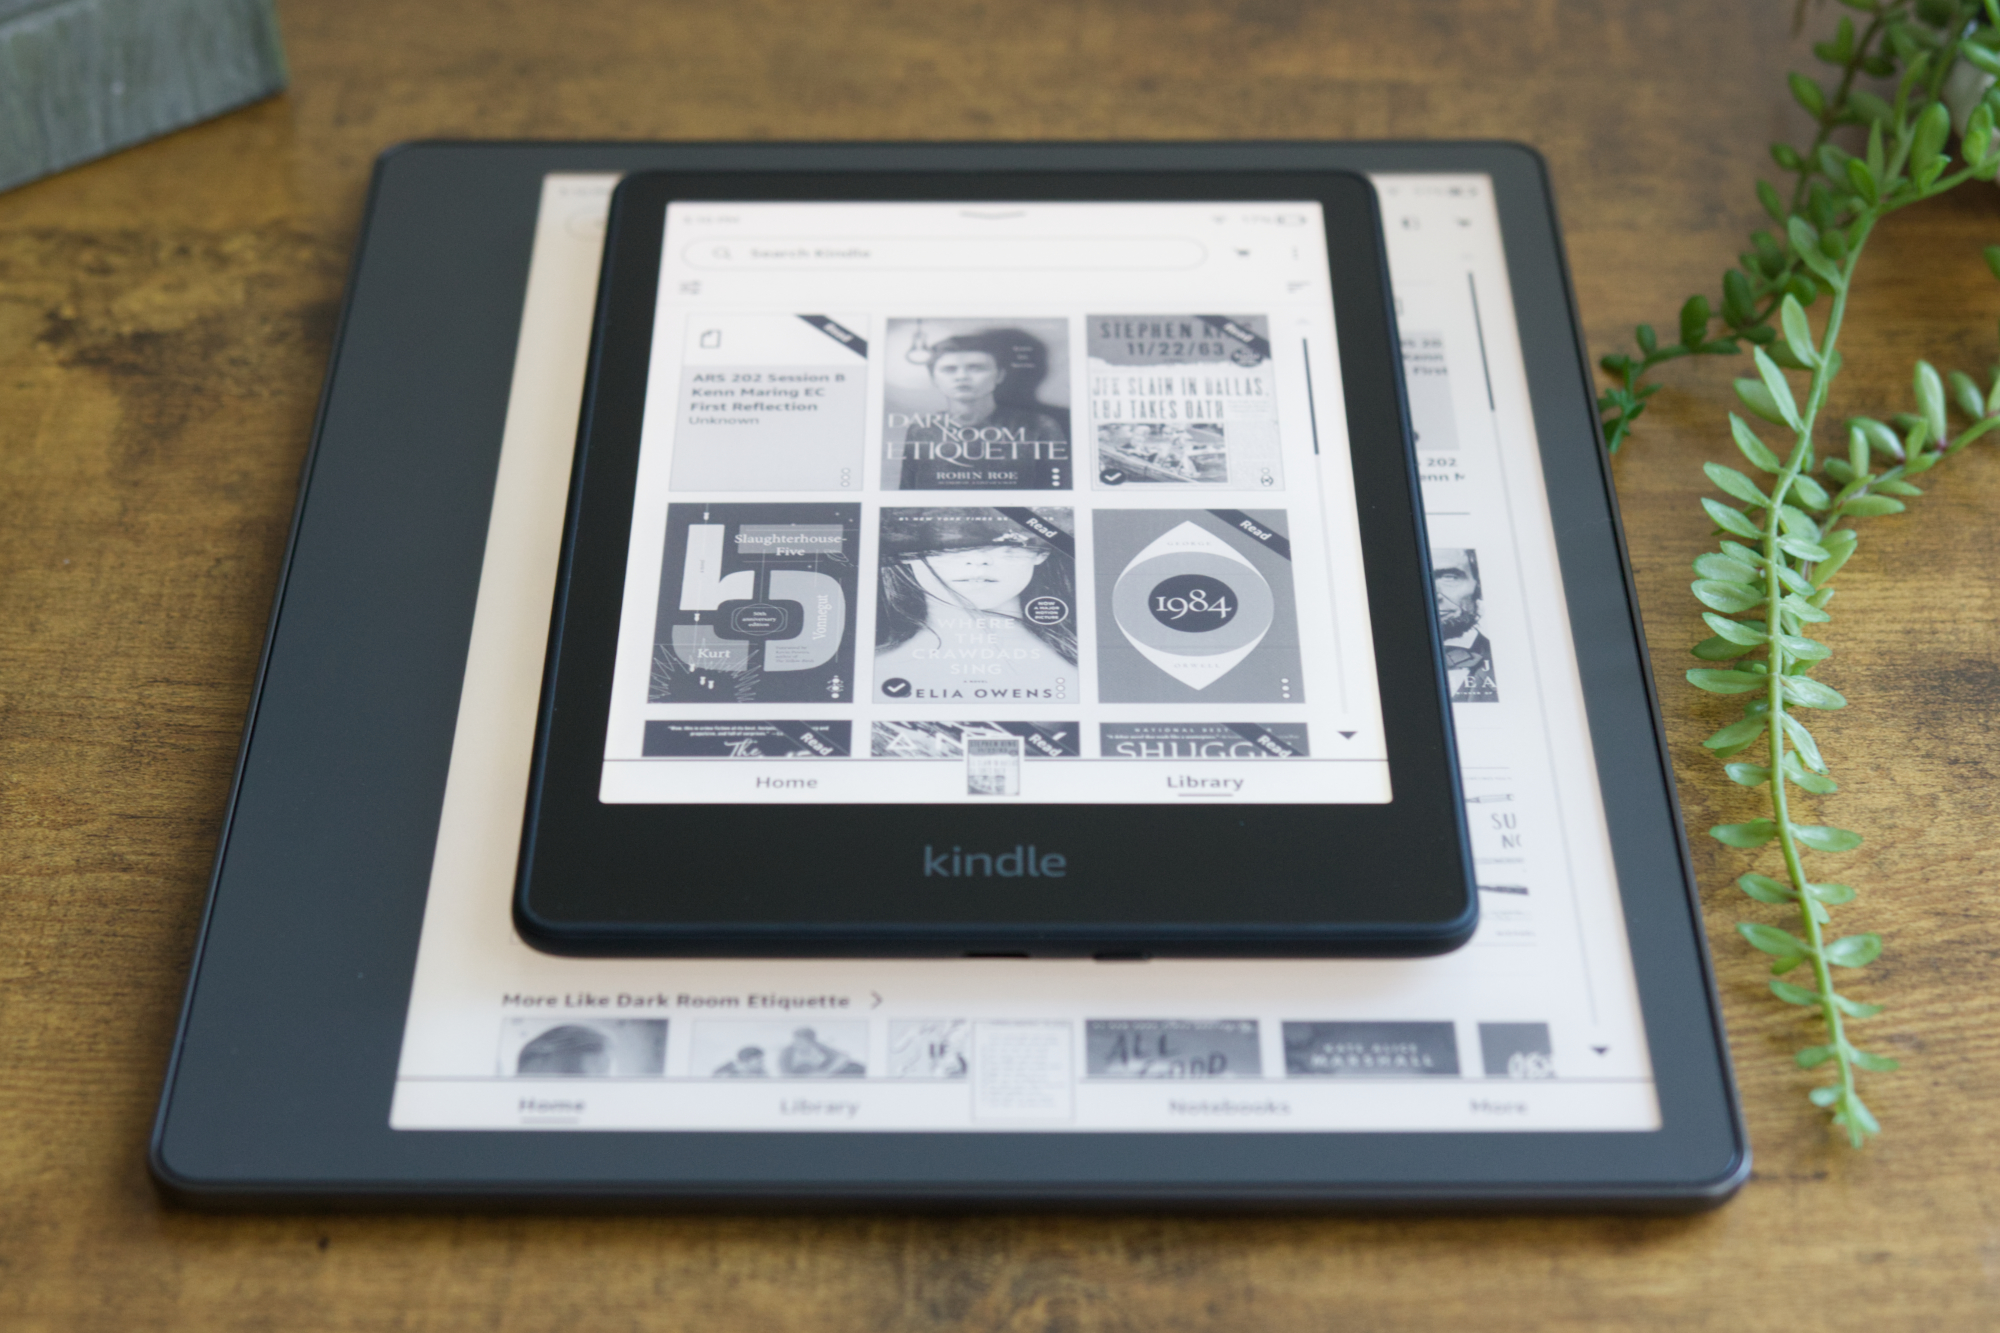 How to Buy Books on Kindle on Desktop or Mobile